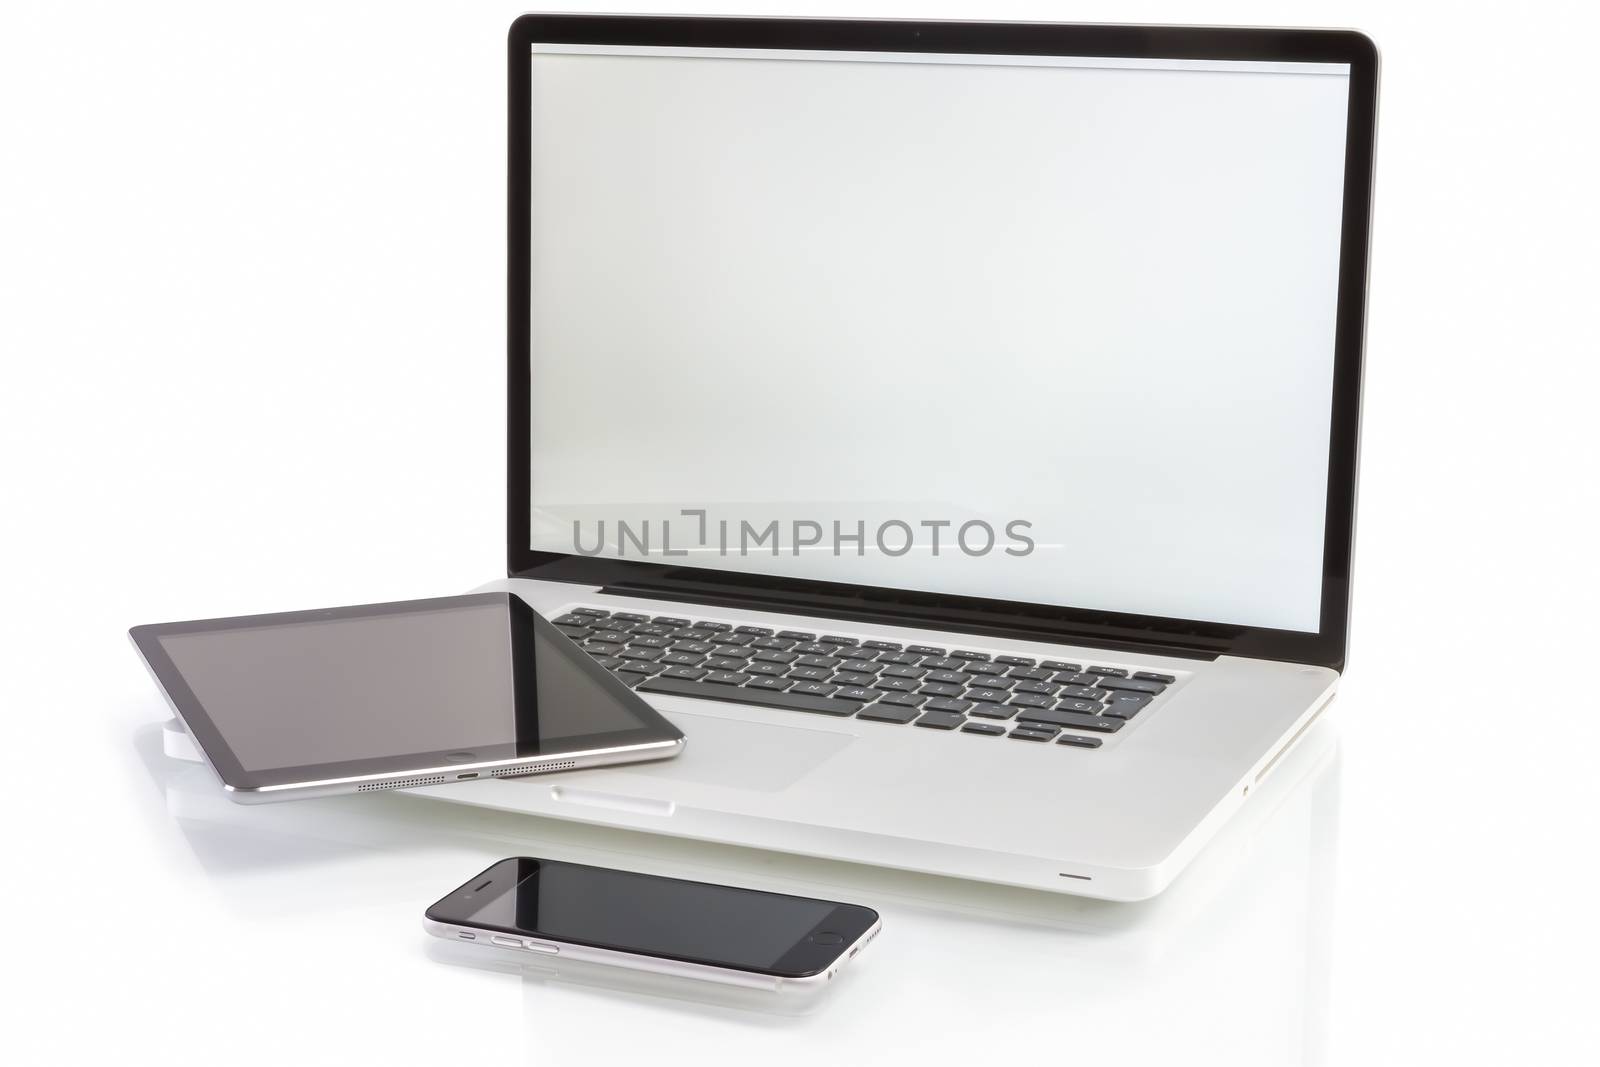 modern computer devices - laptop, tablet and phone by manaemedia